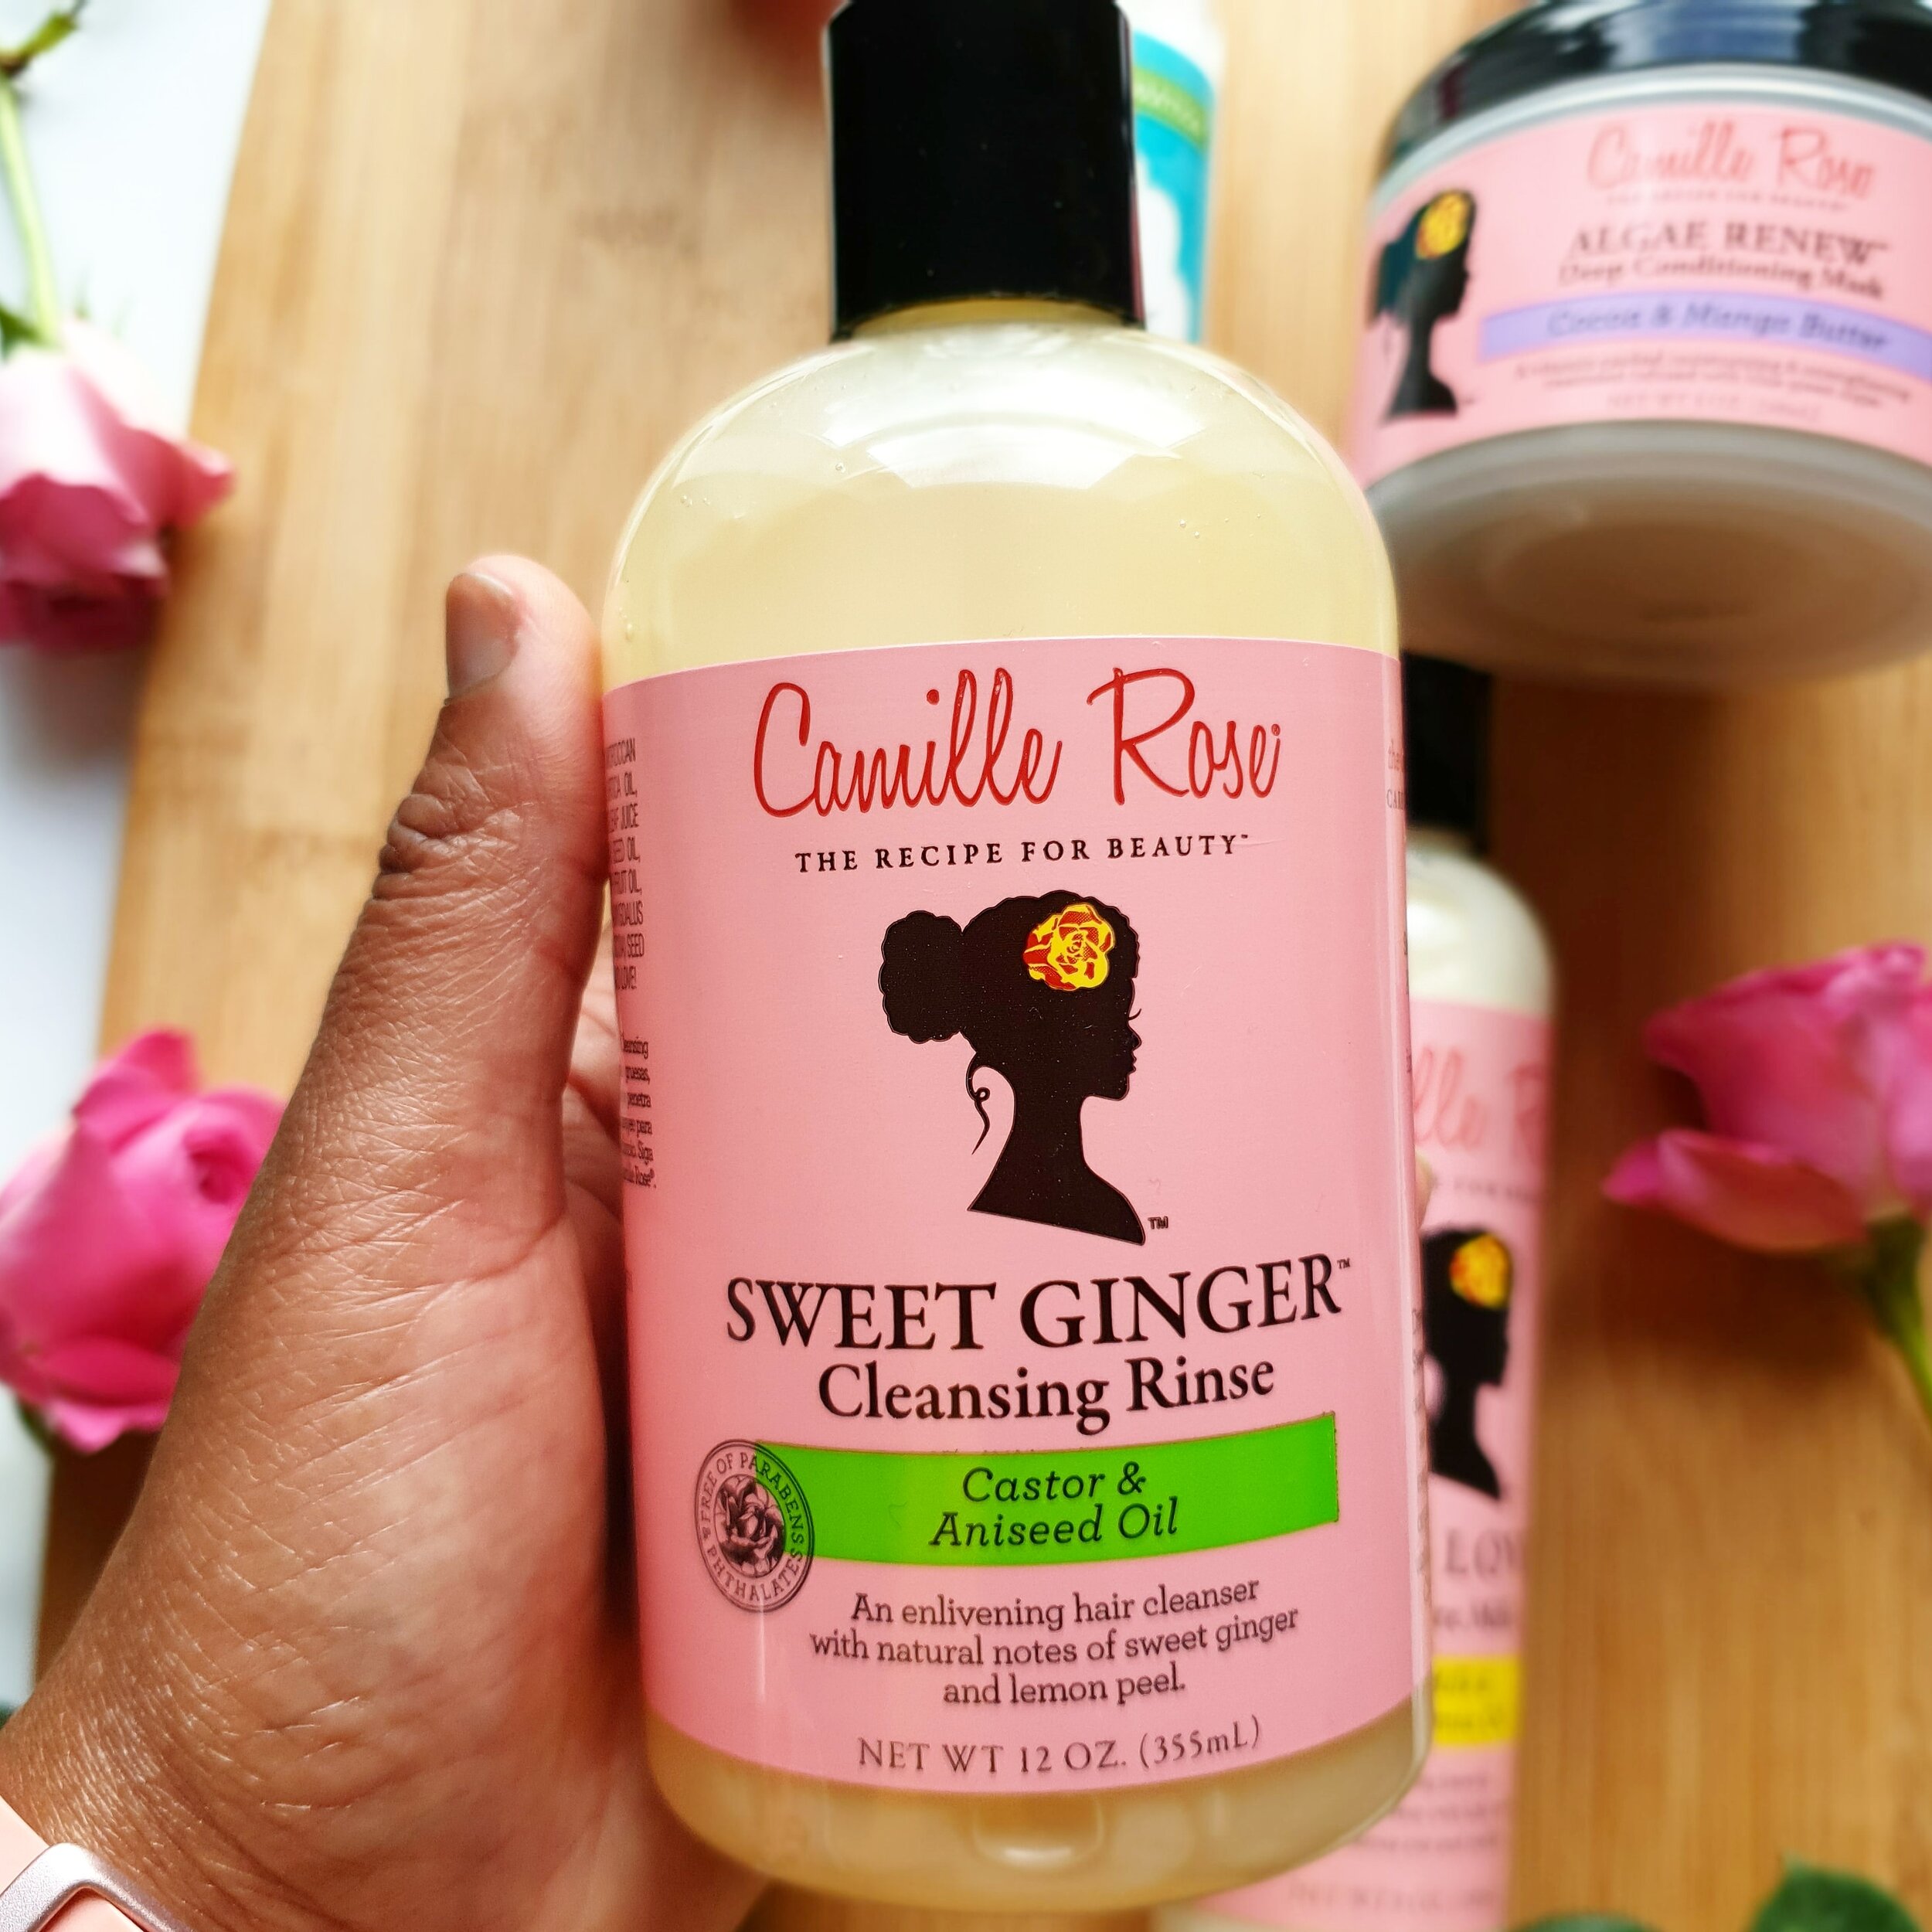 Camille Rose Sweet Ginger Cleansing RInse